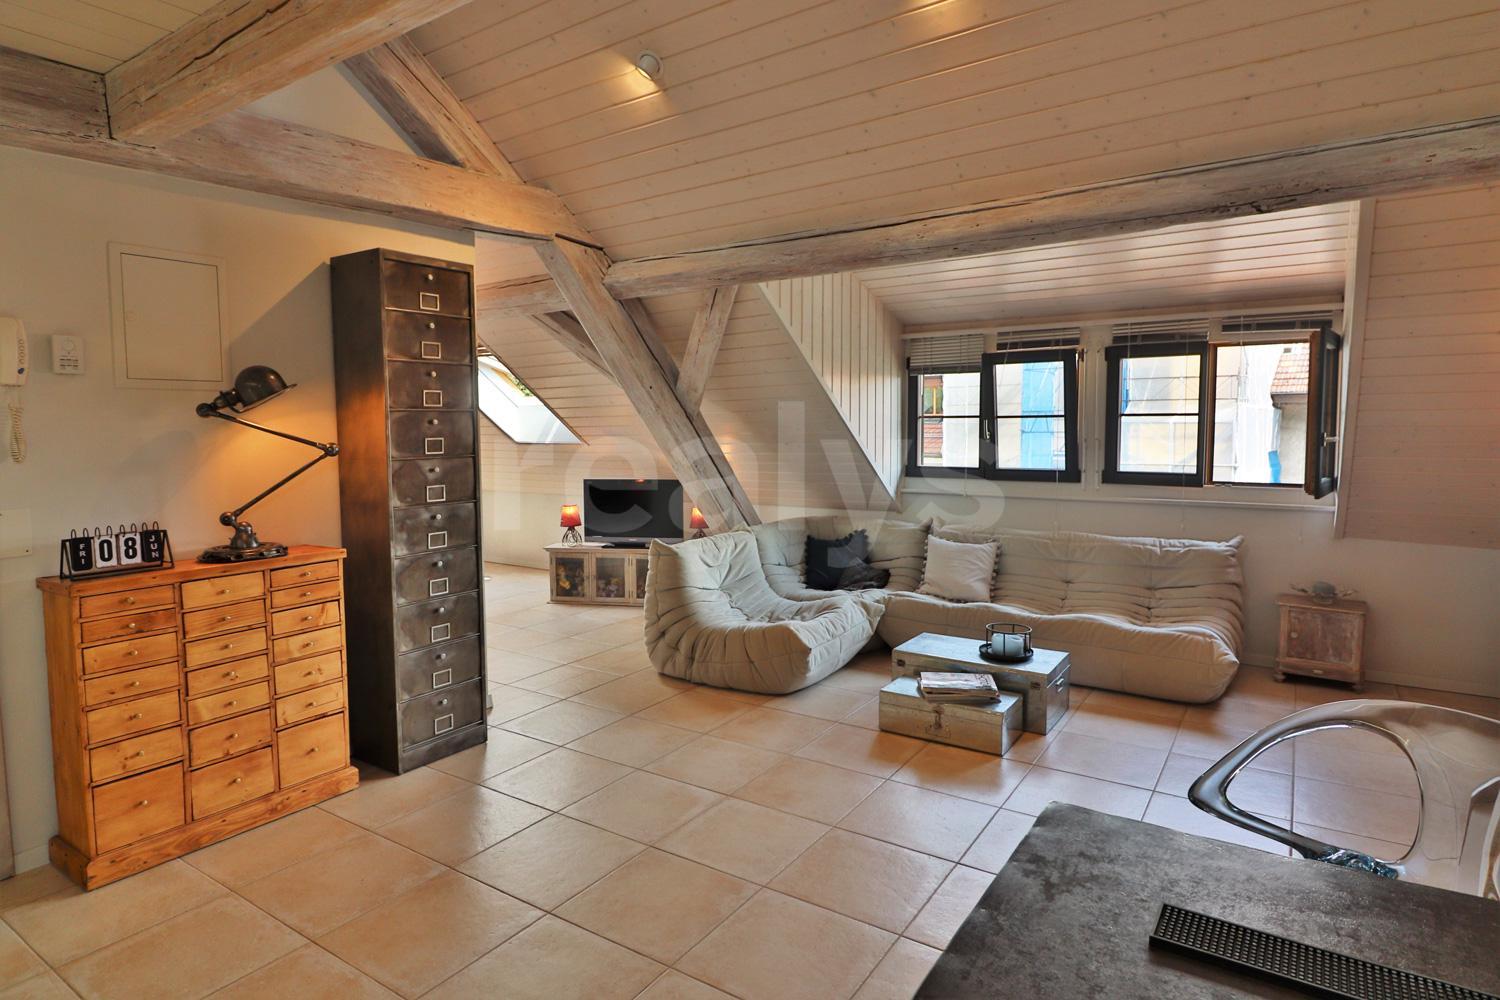 PrivaliaCharming attic flat in the old village of Onex